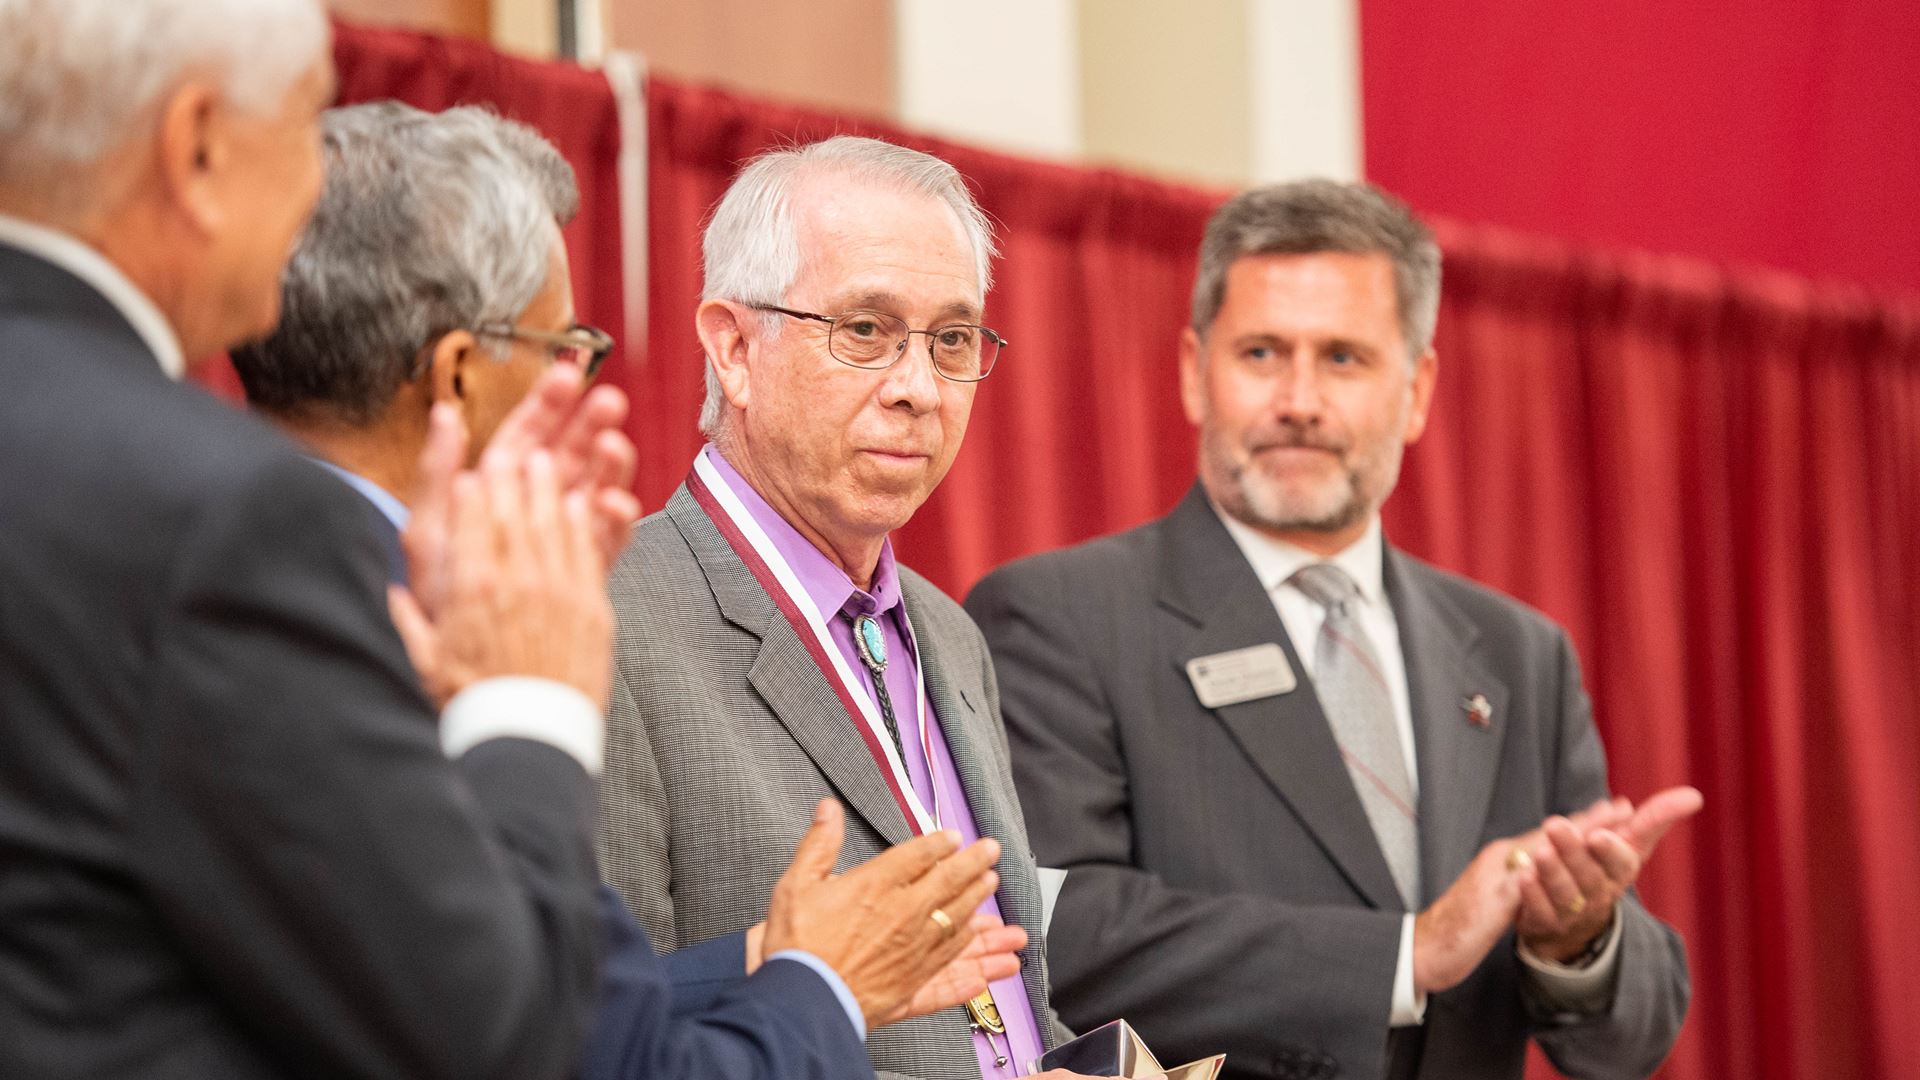 NMSU alum Richard Leza to be inducted into NMSU’s Entrepreneur Hall of Fame